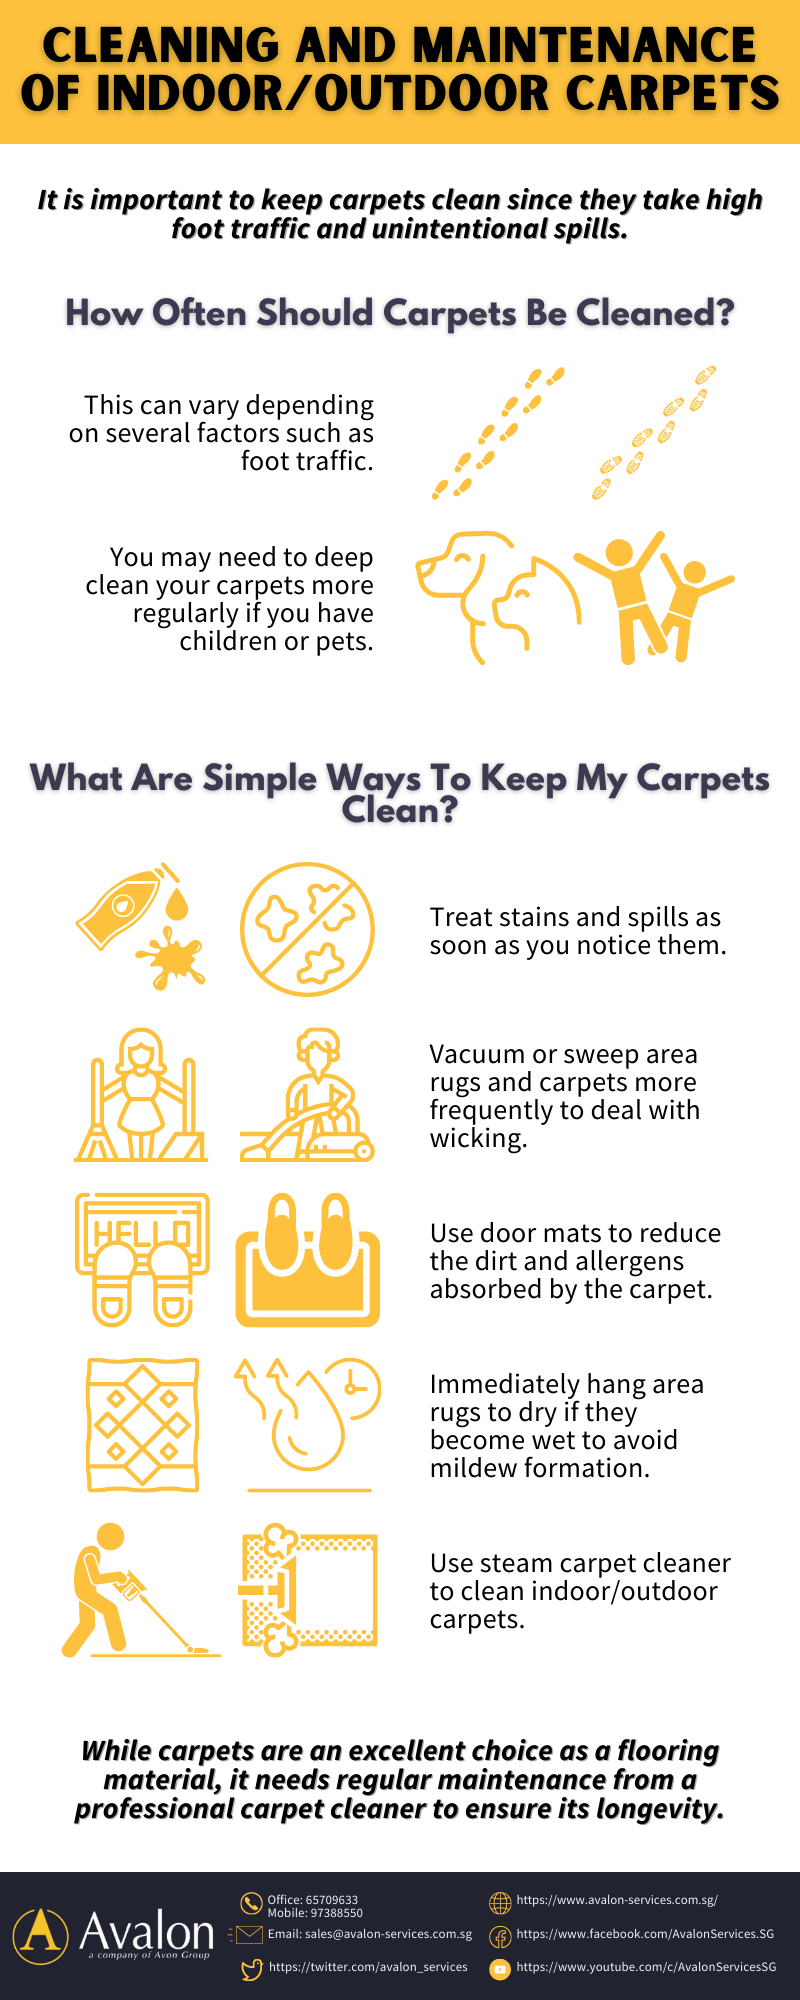 Cleaning and Maintenance of Indoor/Outdoor Carpets